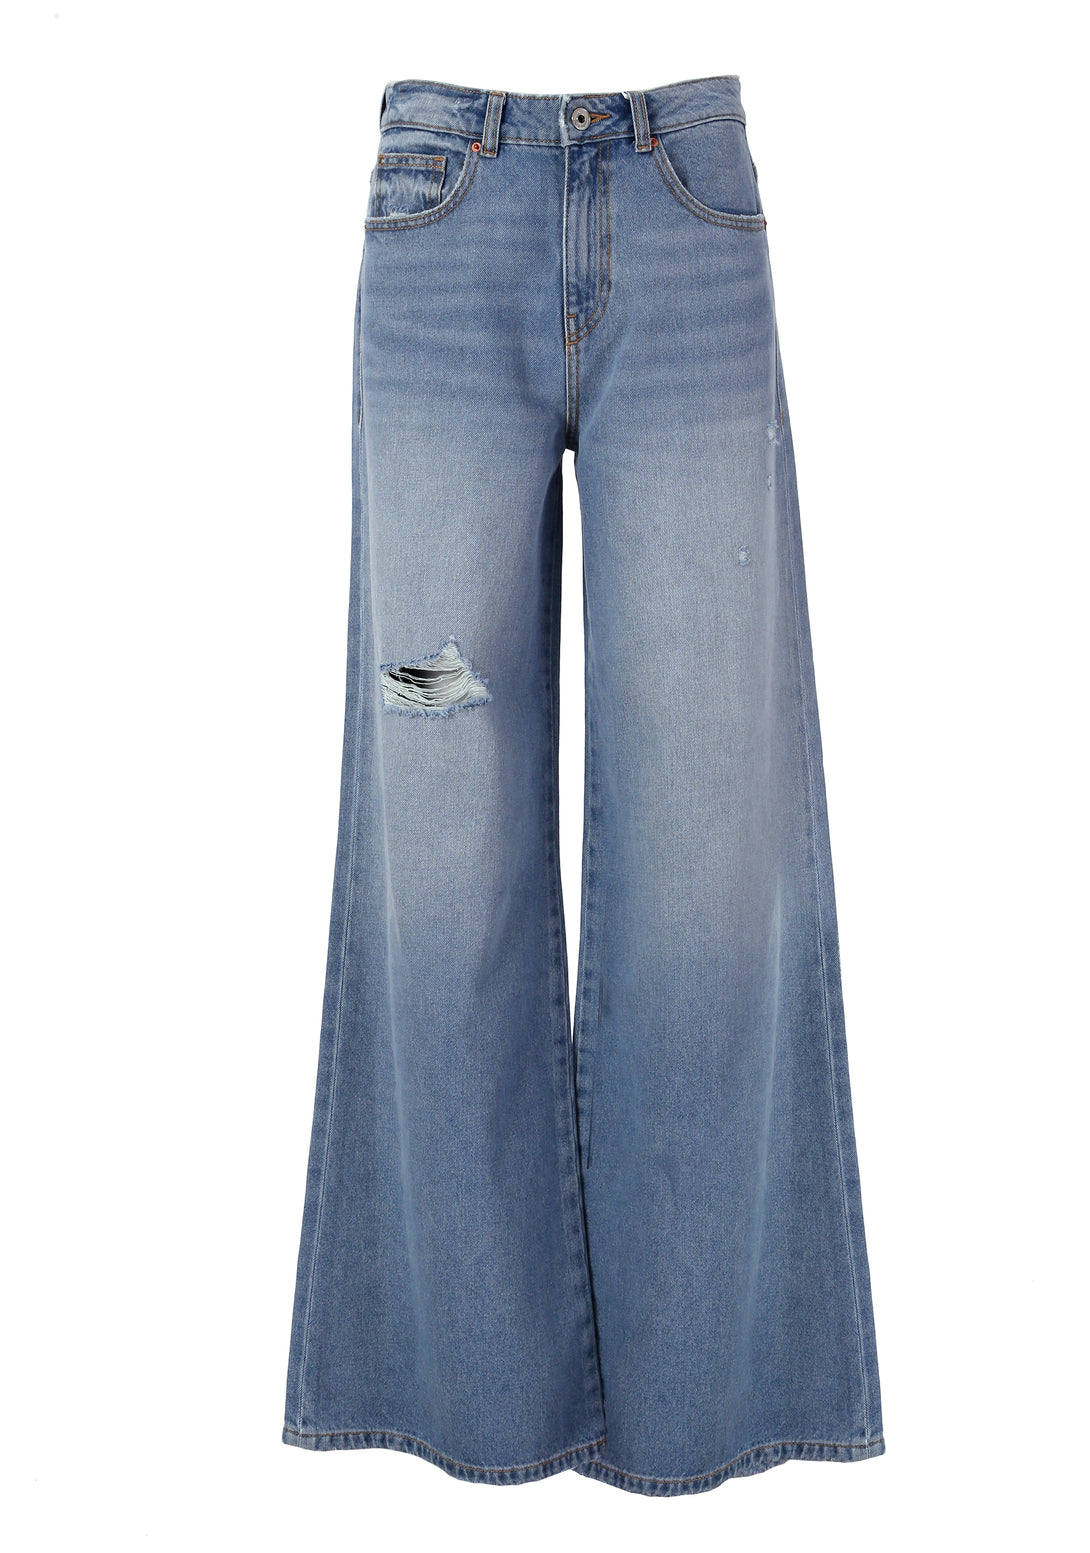 Jeans wide leg made in denim with bleached light wash Fracomina FP24SV3015D41903-062-1